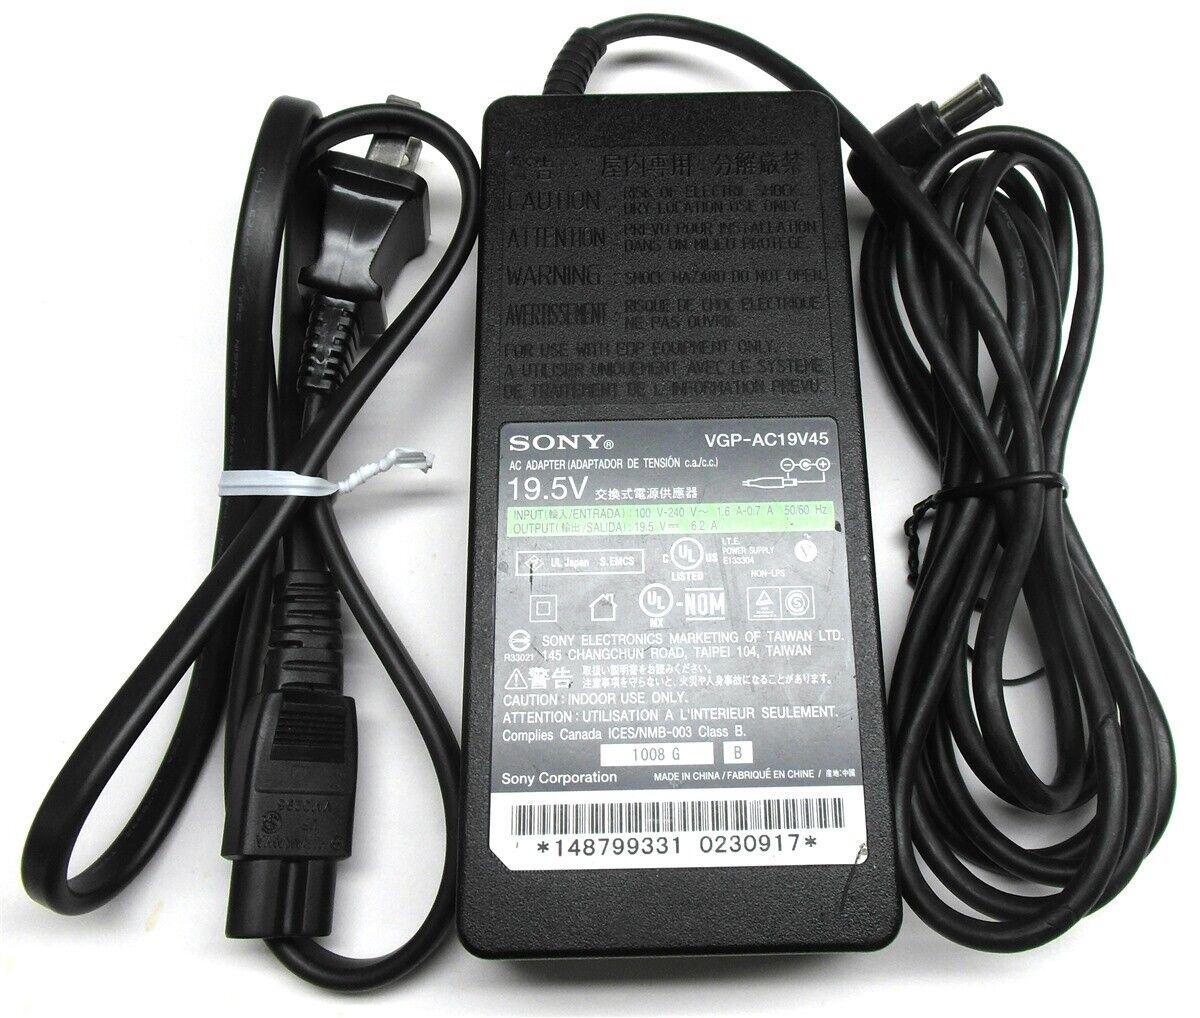 Genuine Sony Laptop Charger AC Adapter Power Supply VGP-AC19V45 19.5V 6.2A 120W 